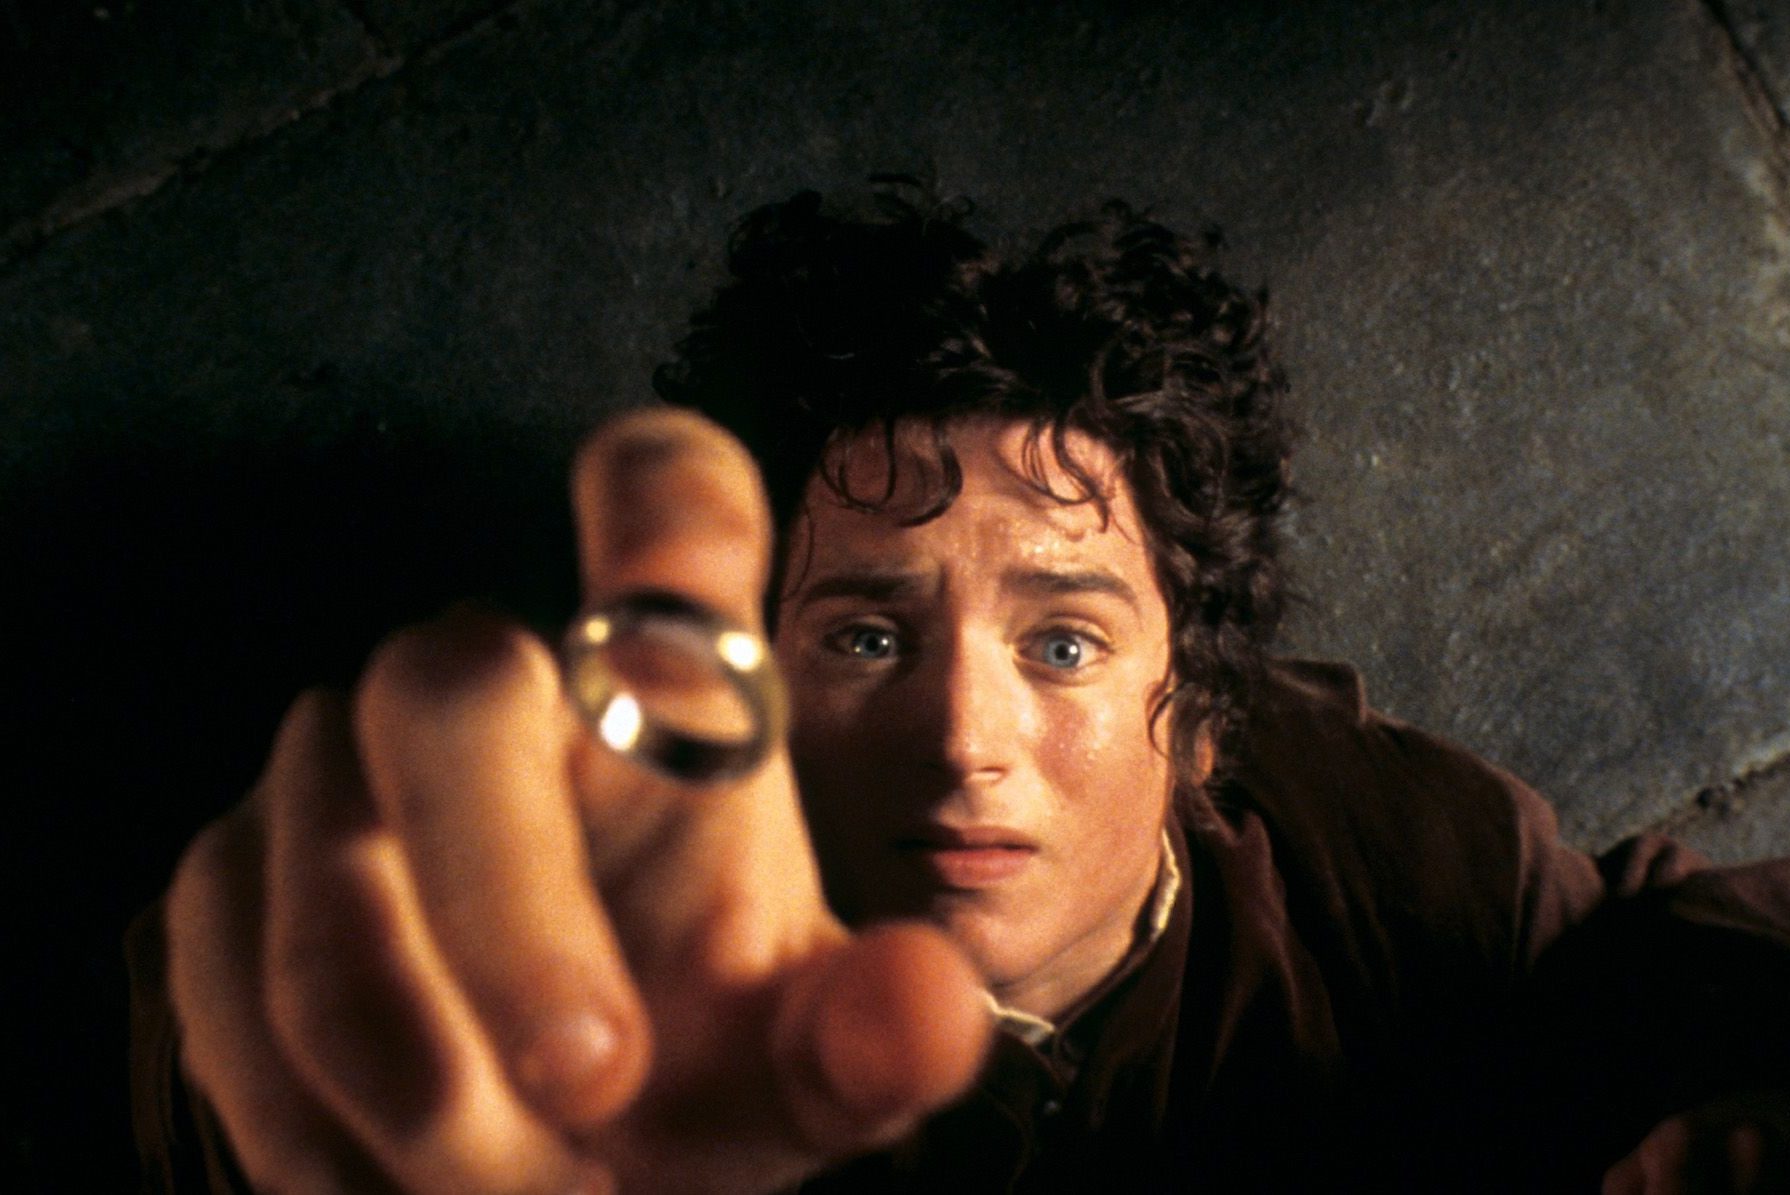 Elijah Wood in "The Lord of the Rings"